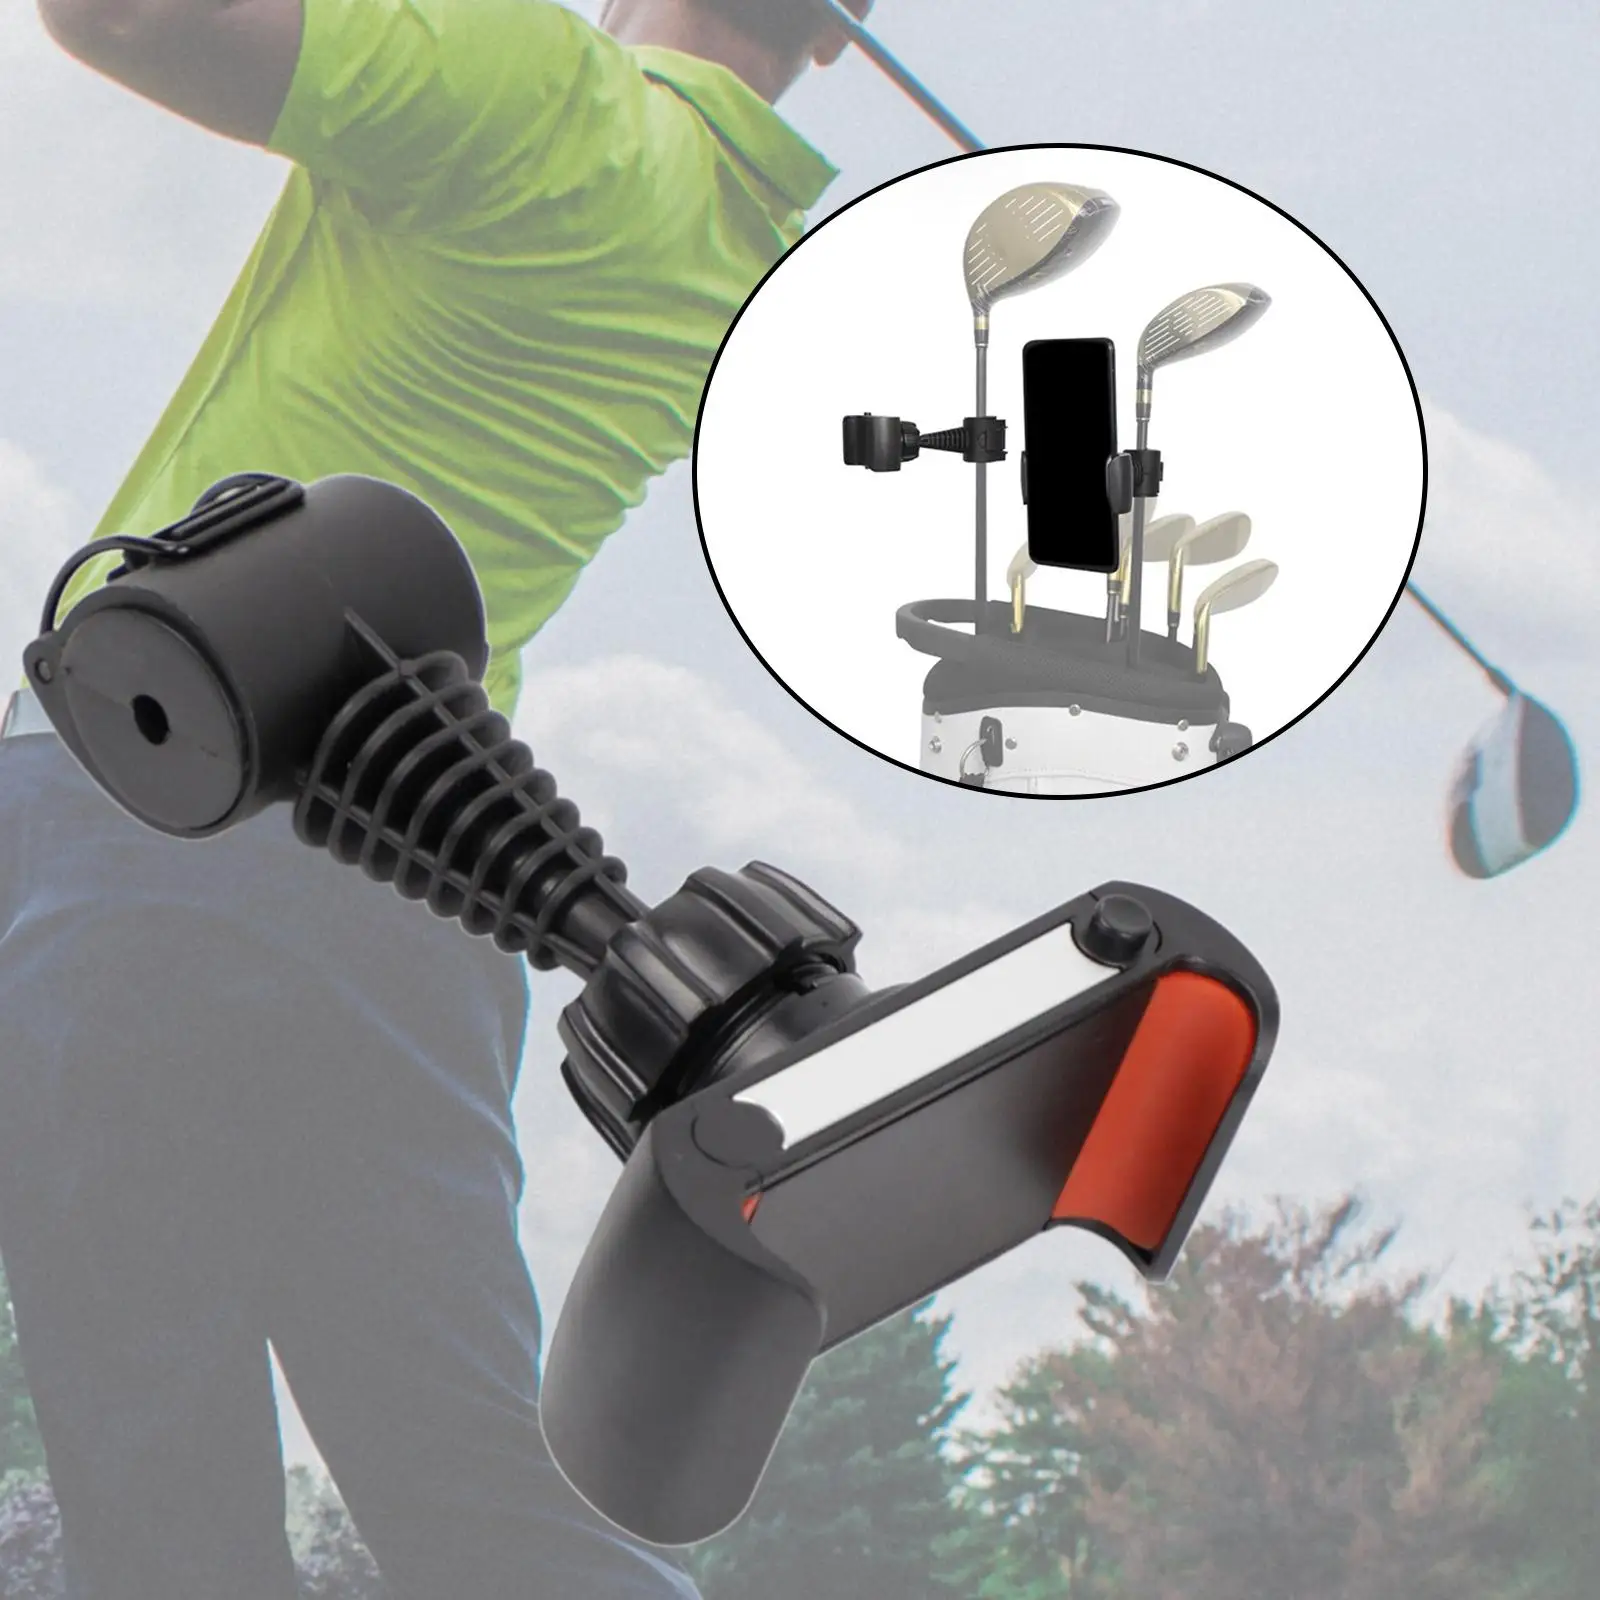 Golf Phone Holder Fittings Replacement Sturdy Multipurpose Selfie Clip Bracket for Swing Recording Putting Cell Phone Short Game